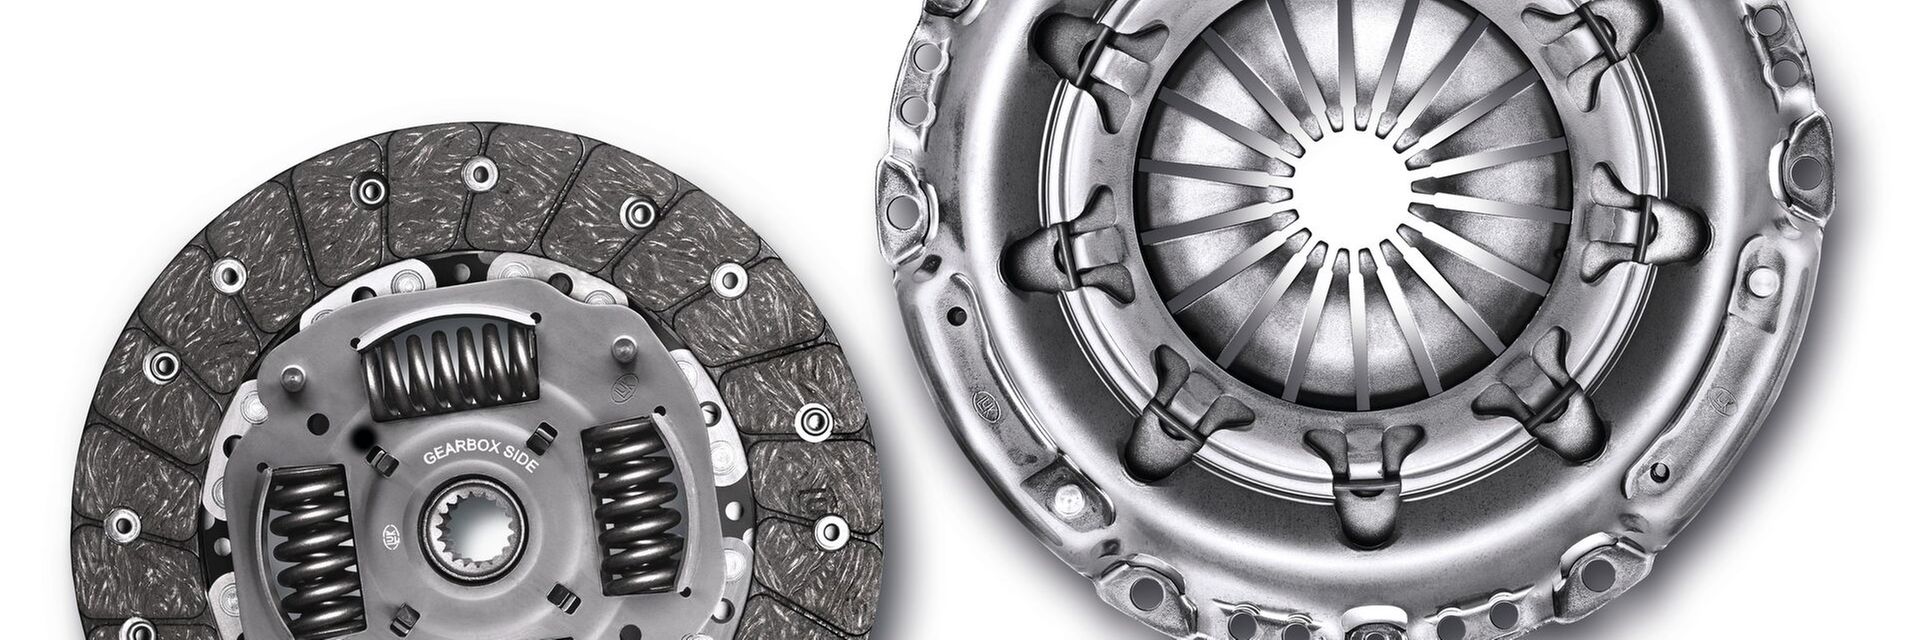 Schaeffler Automotive Aftermarket clutch from above with release bearing